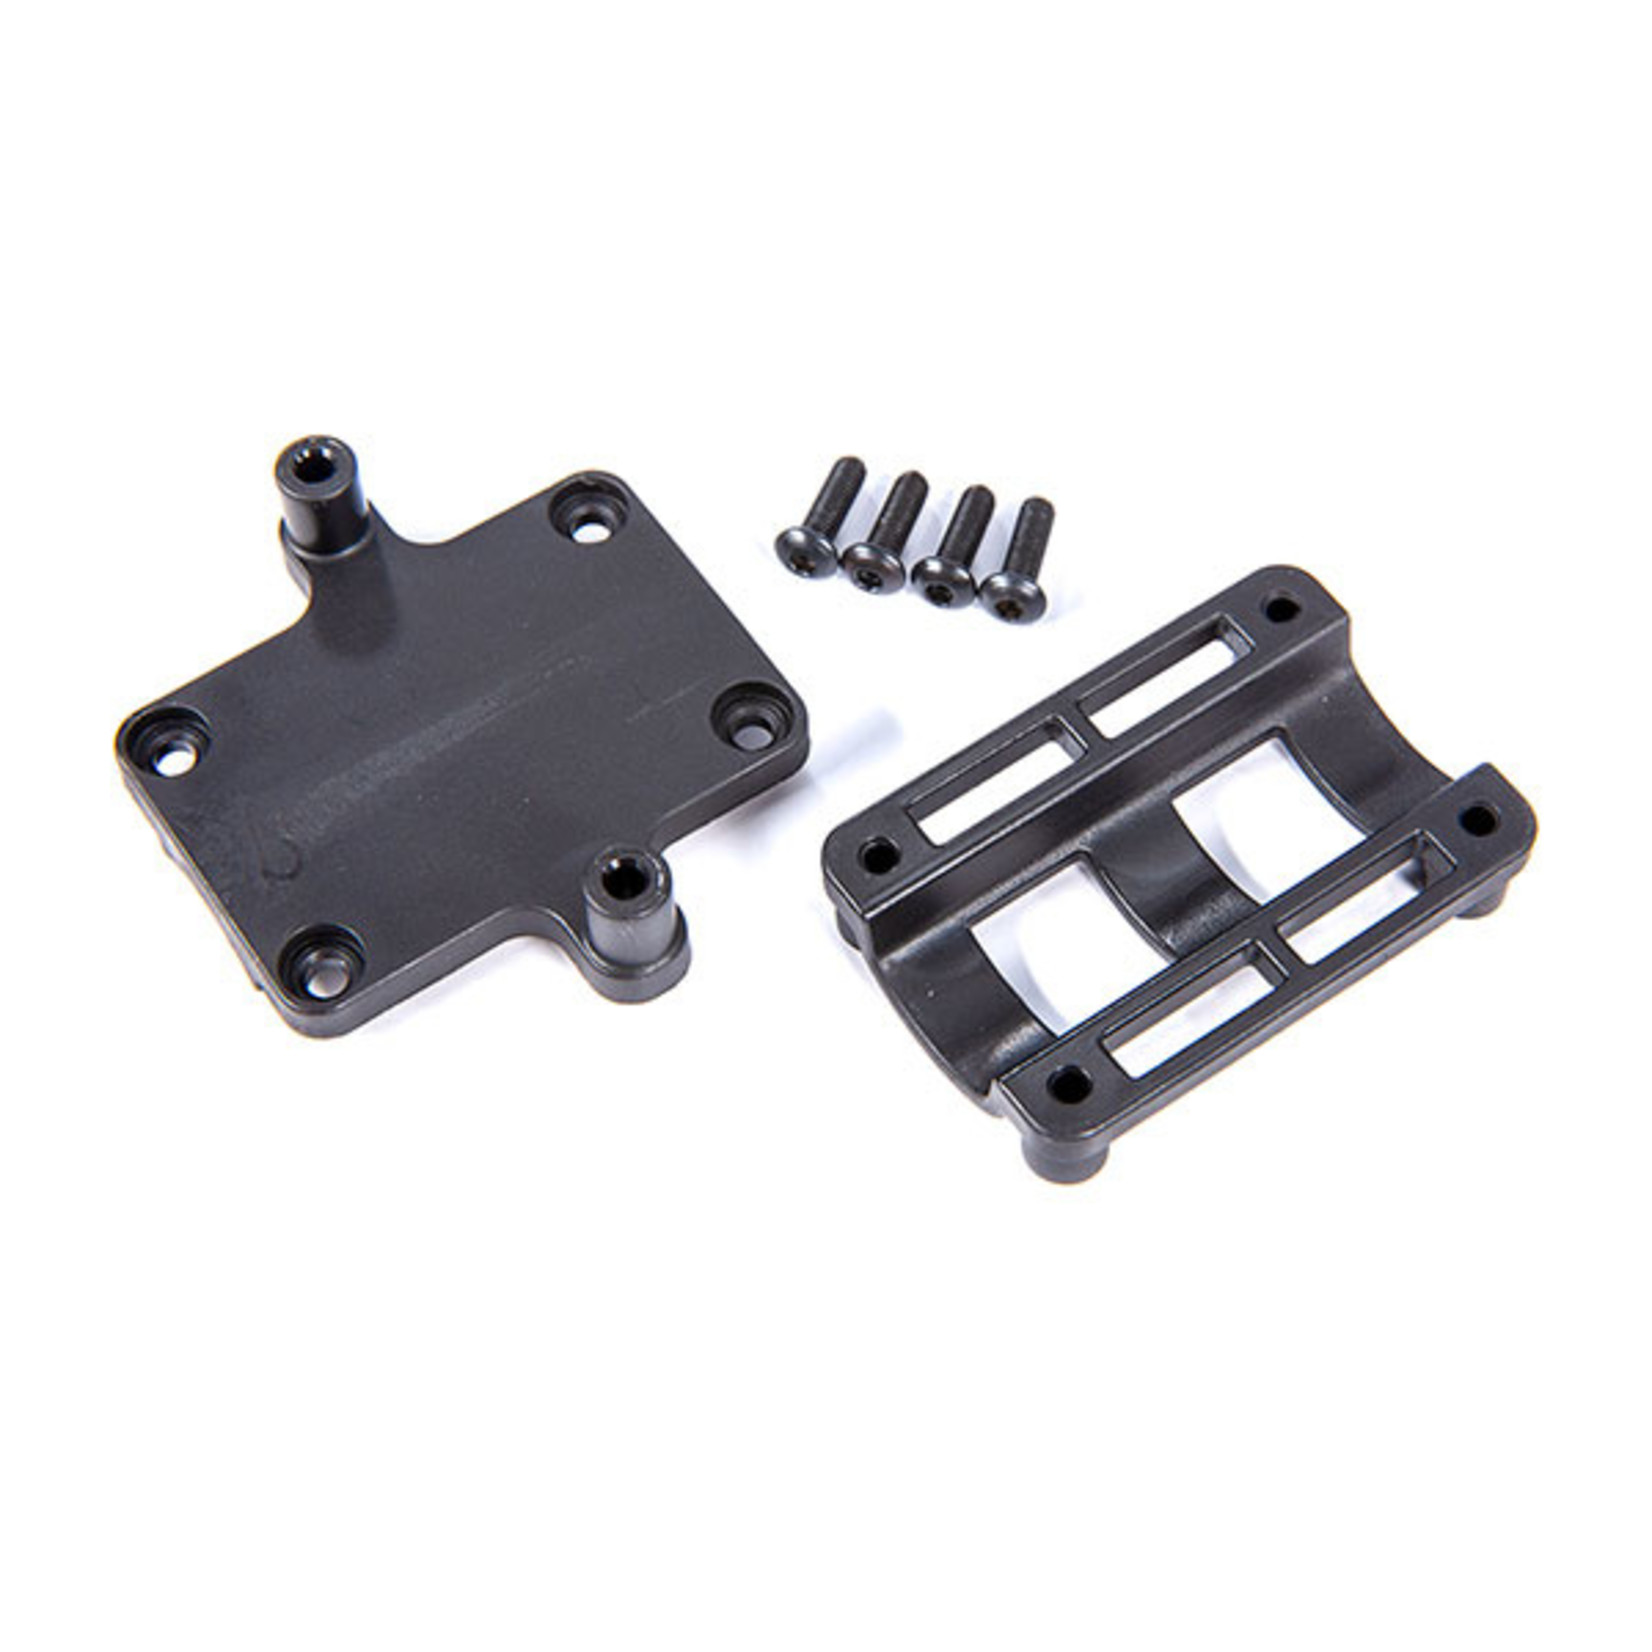 Traxxas 6562 - Mount, telemetry expander (requires #6730 c